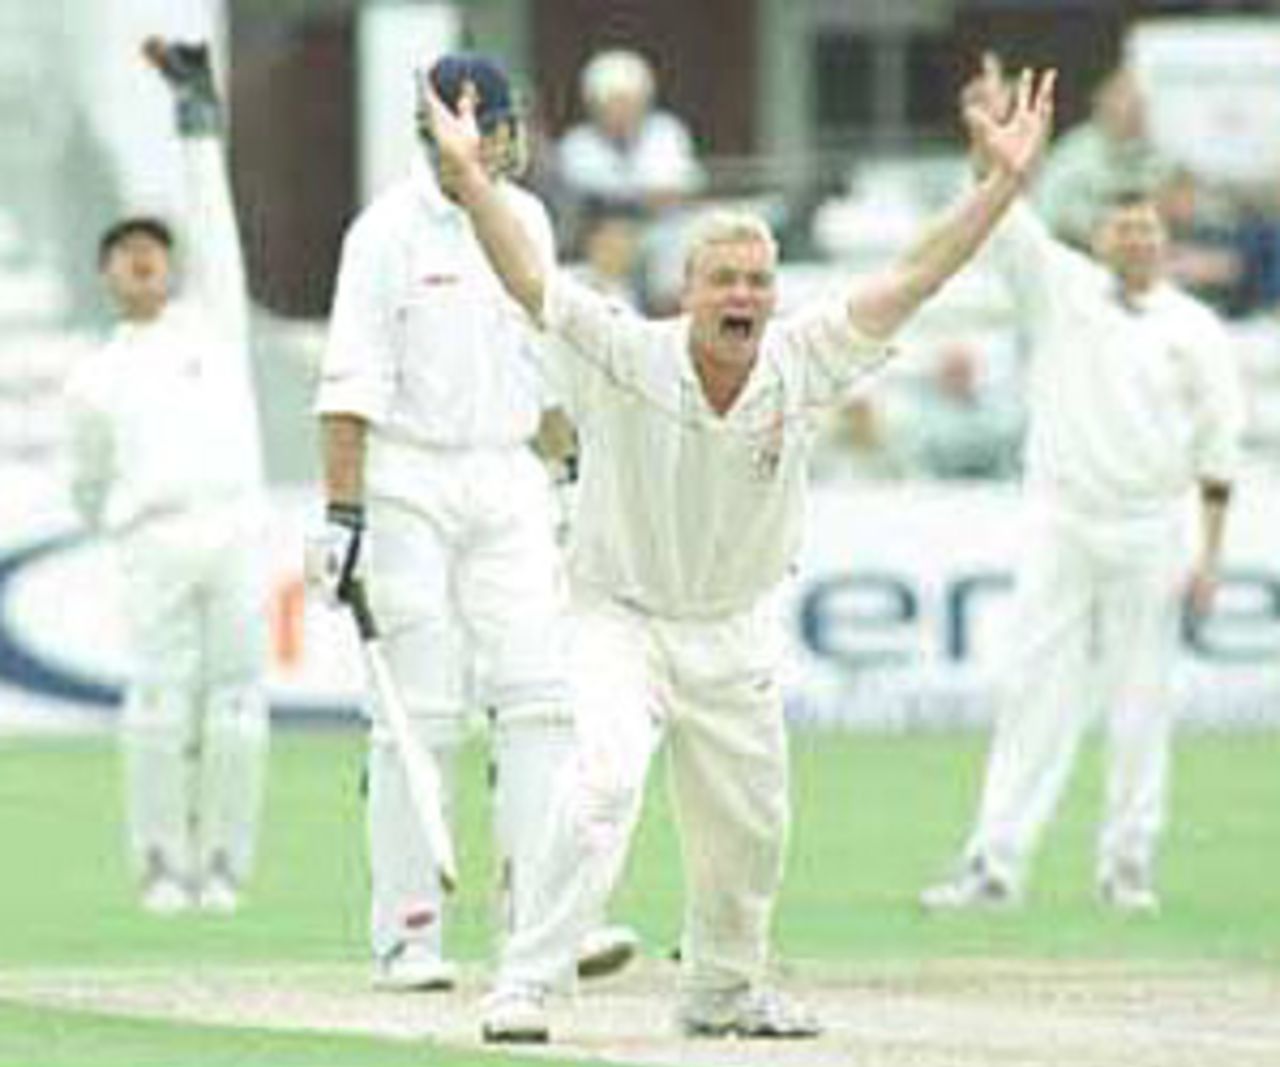 Richard Green appeals for an LBW against Stubbings, PPP healthcare County Championship Division One, 2000, Derbyshire v Lancashire, County Ground, Derby, 07-10 July 2000 (Day 1).